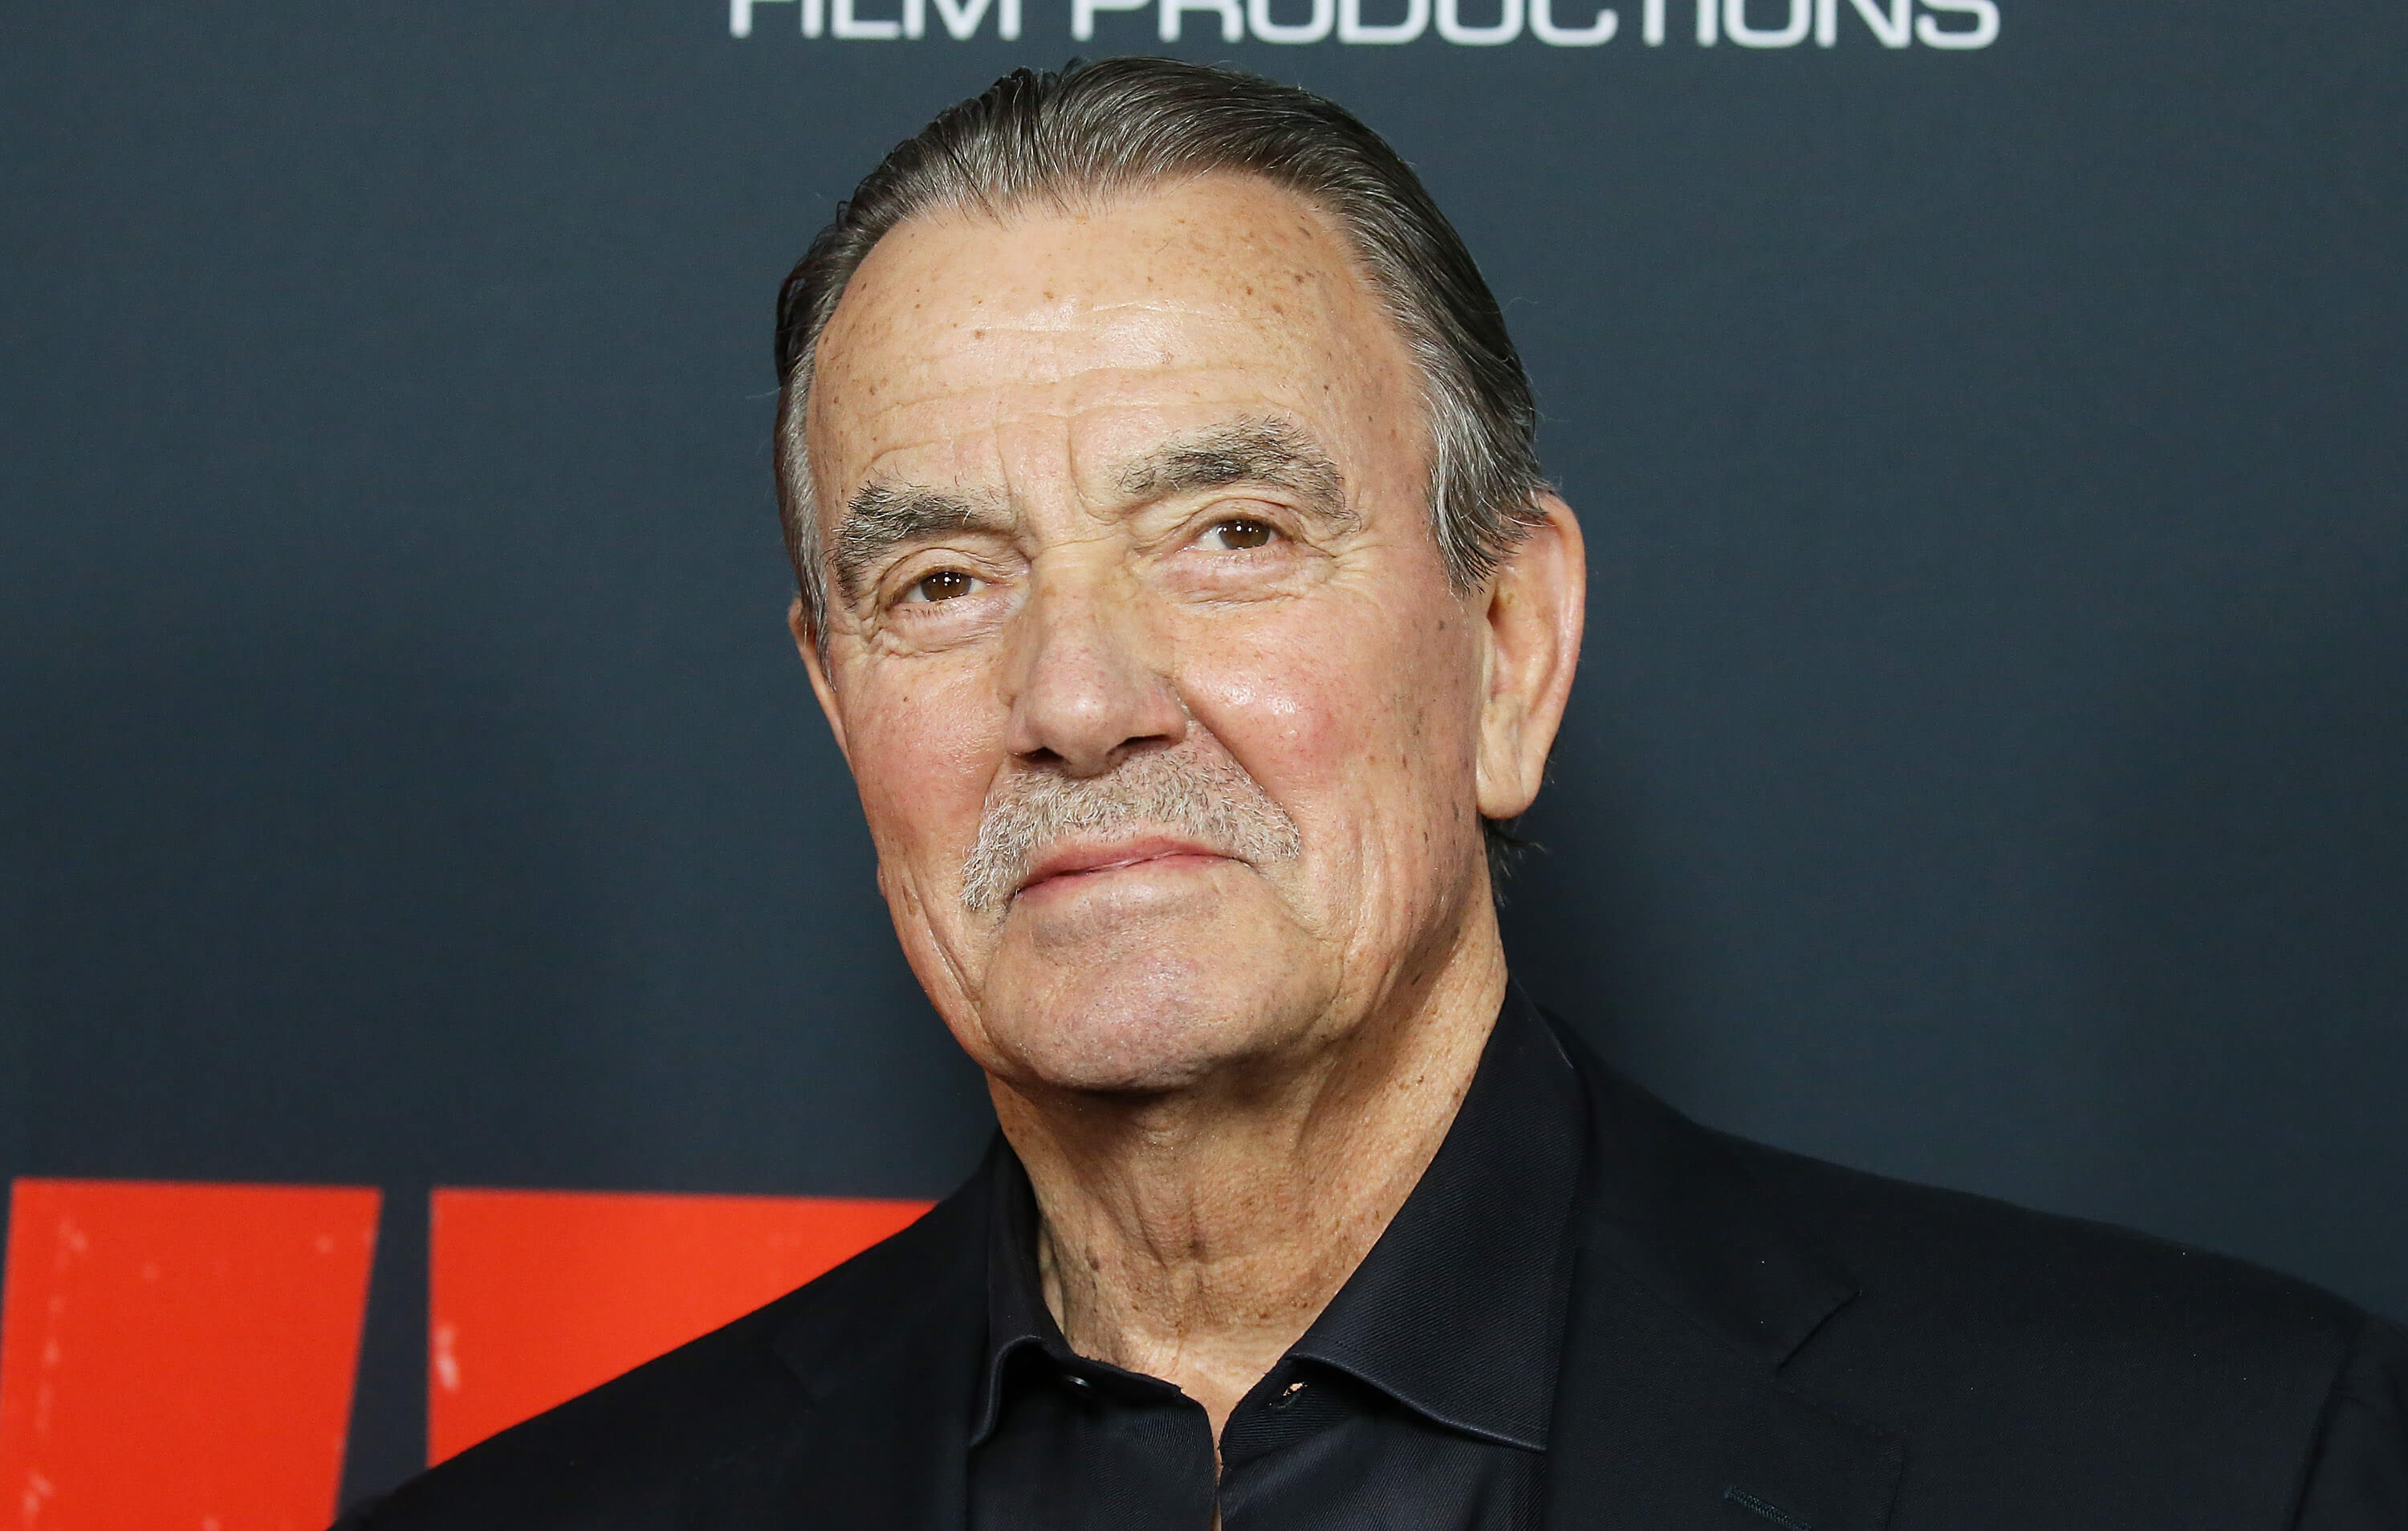 'The Young and the Restless' star Eric Braeden dressed in a black suit; posing on the red carpet.